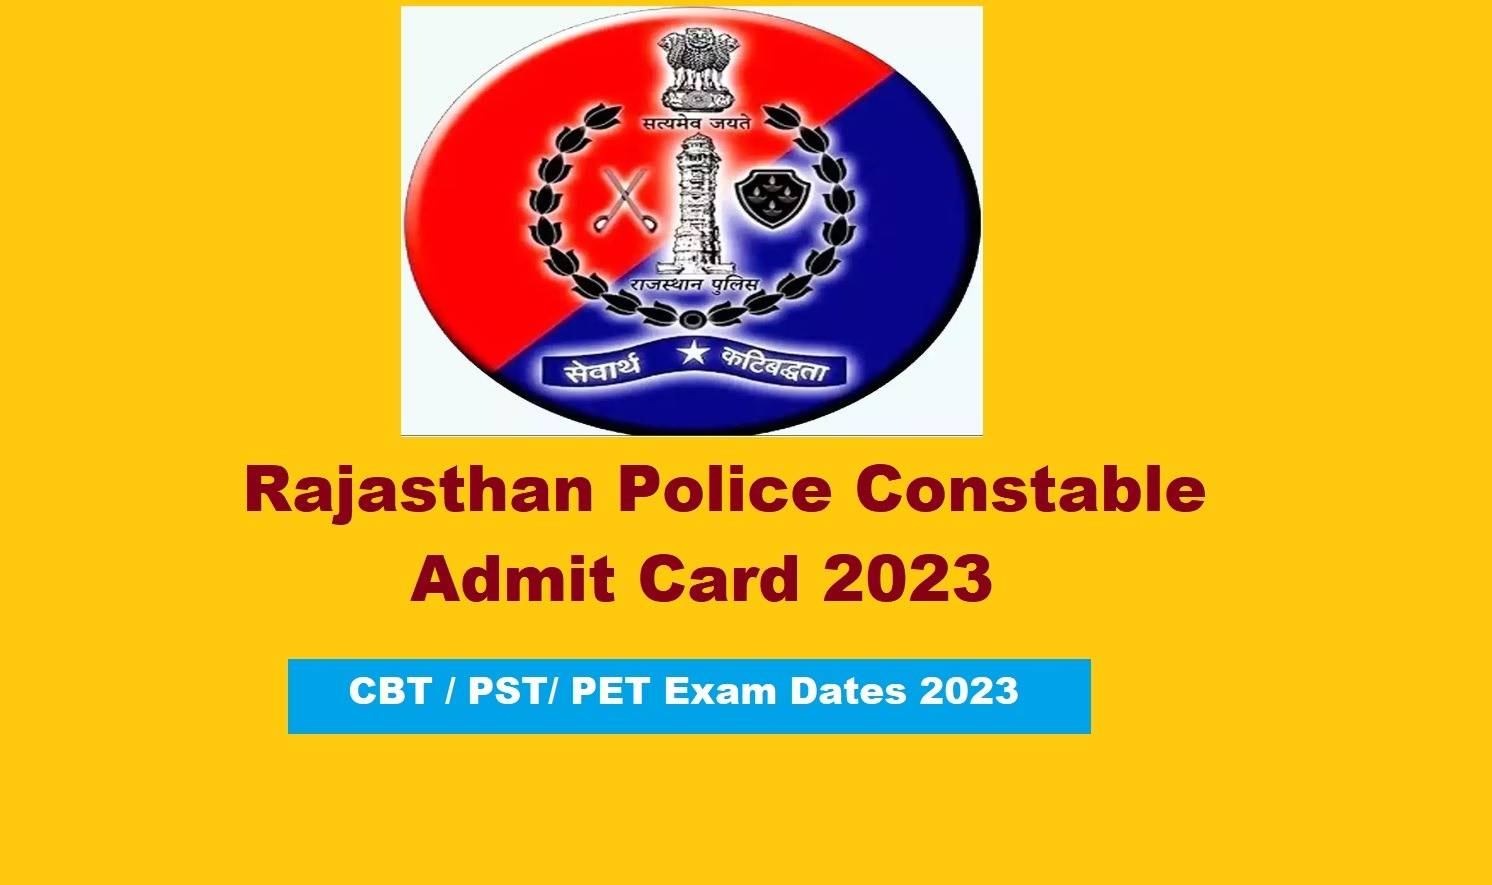 Rajasthan Police Constable Admit Card 2023, Download Link